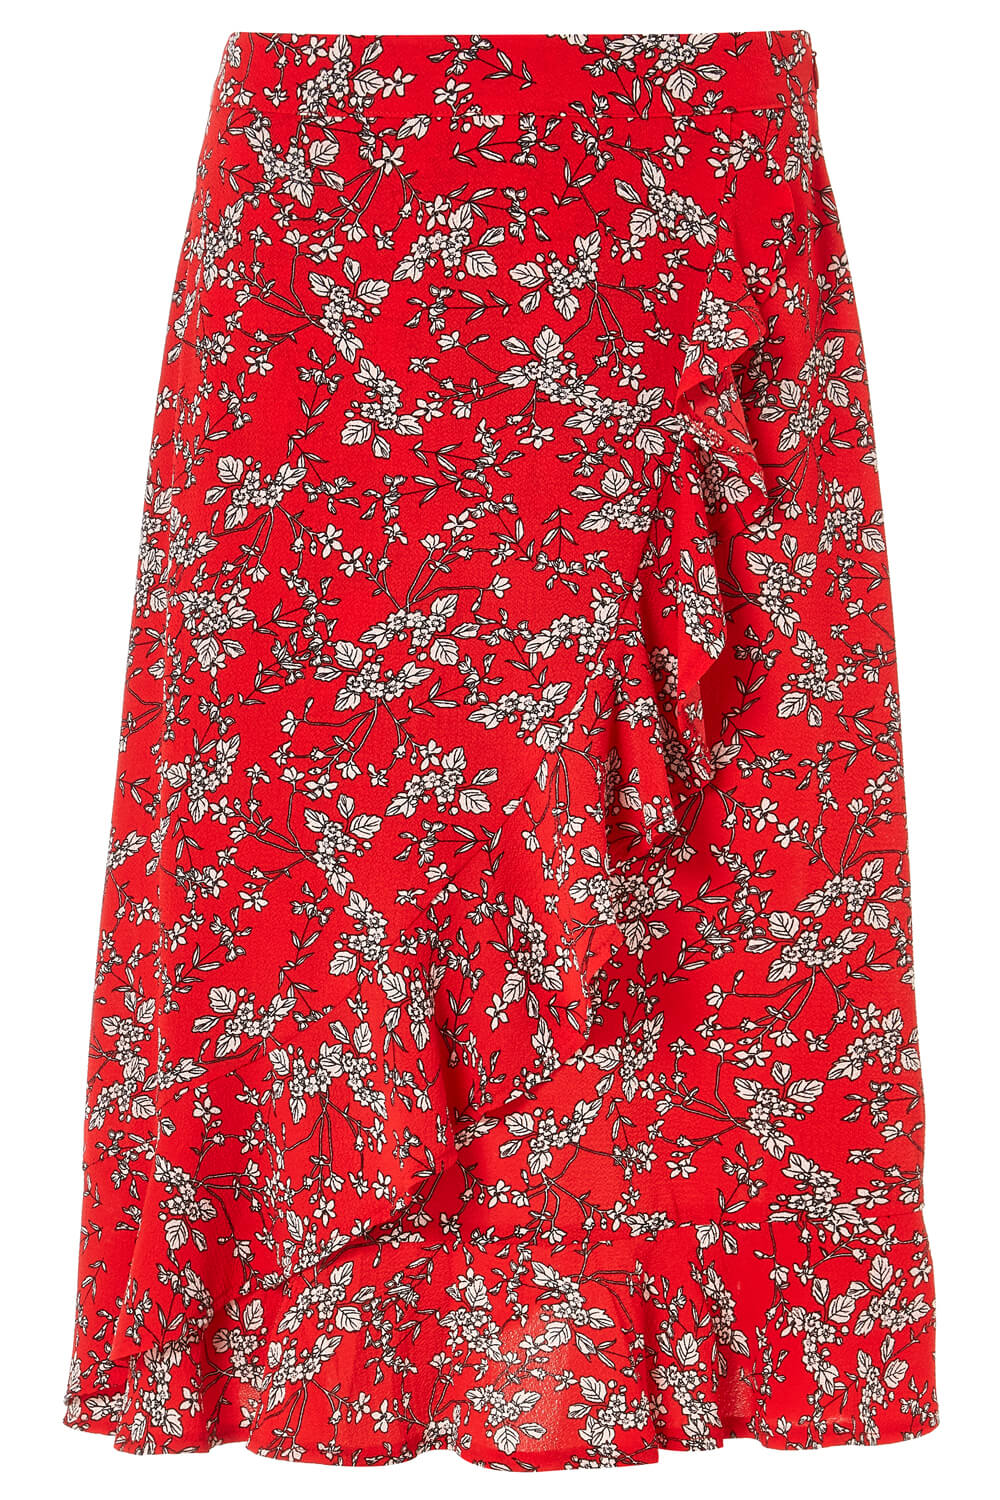 Red Ditsy Floral Ruffle Detail Skirt, Image 5 of 5